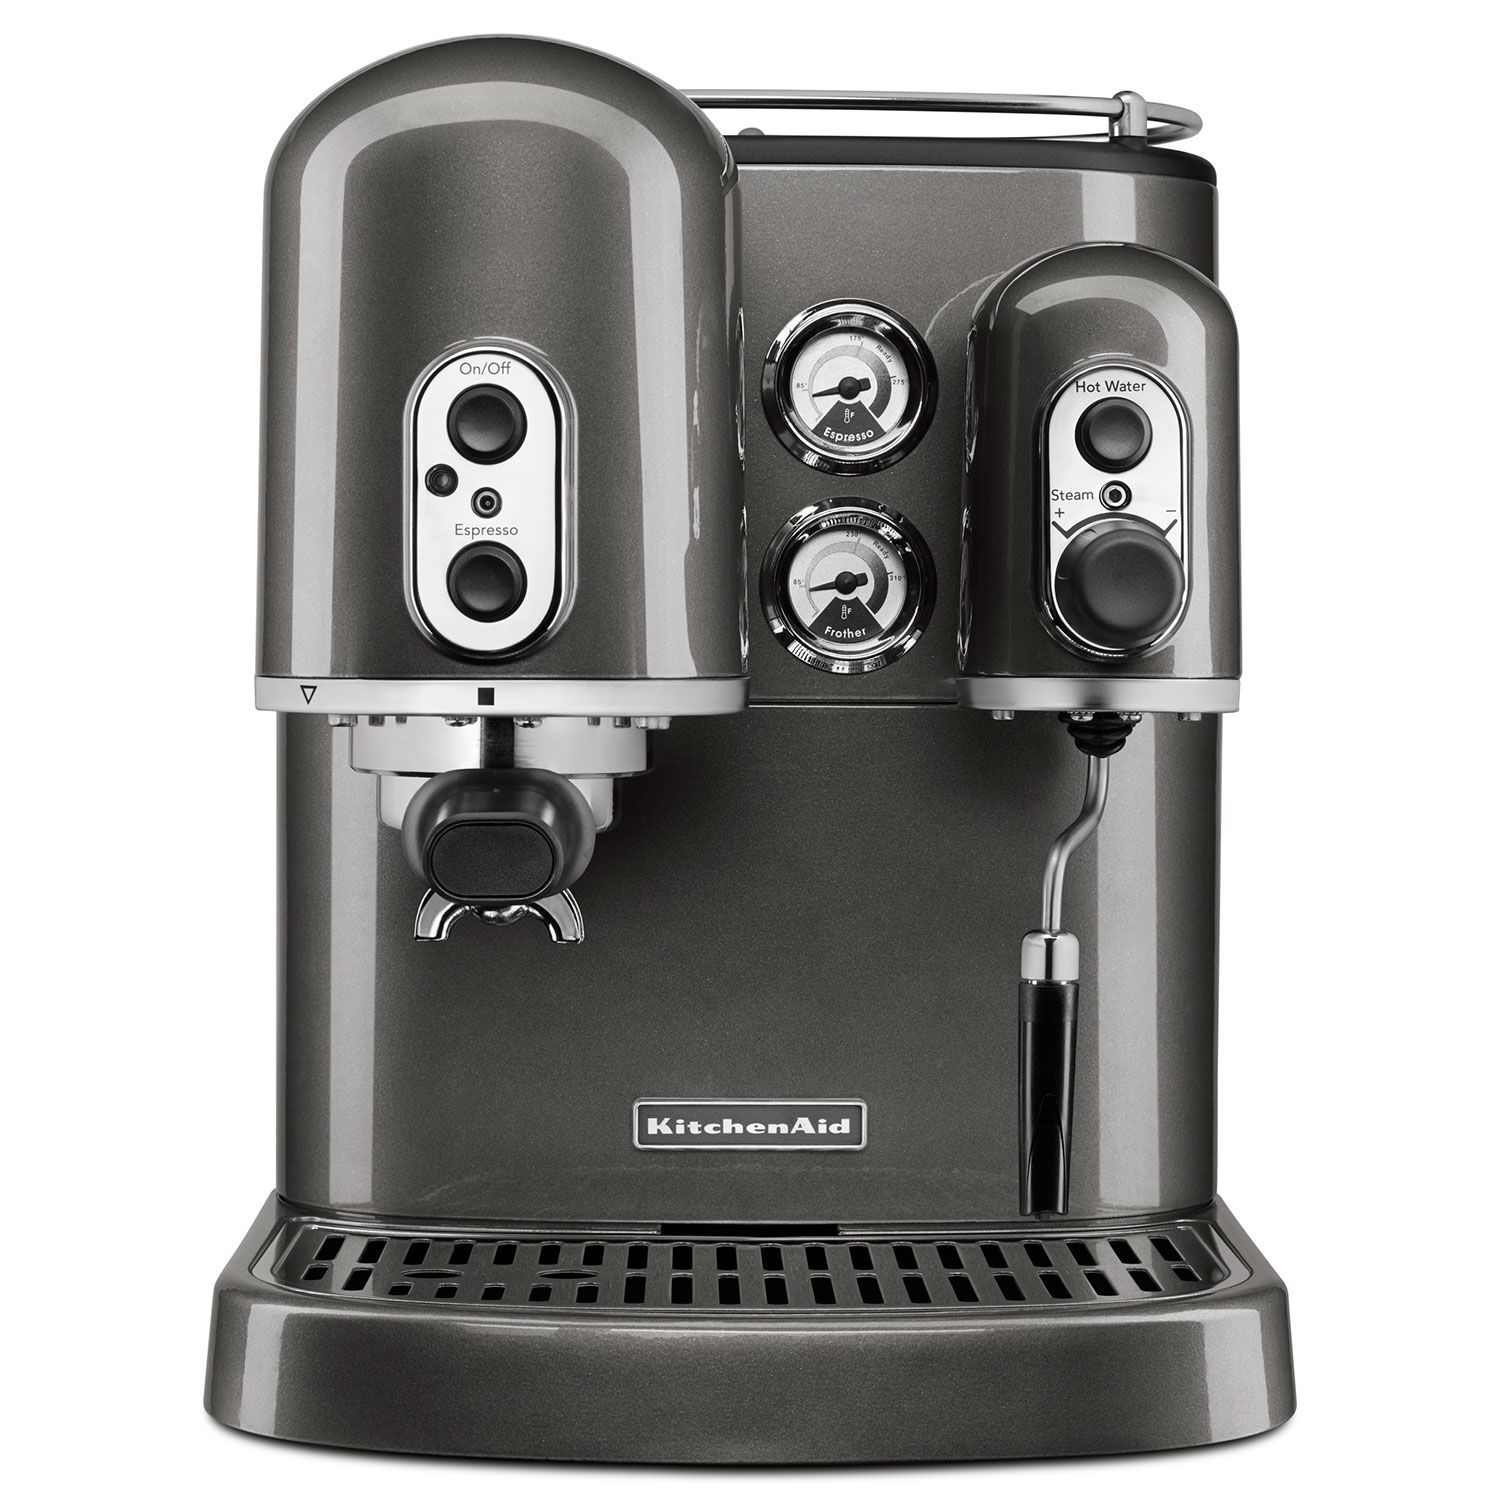 KitchenAid (KES2102MS) Pro Line Series Espresso Maker with Dual Independent Boilers